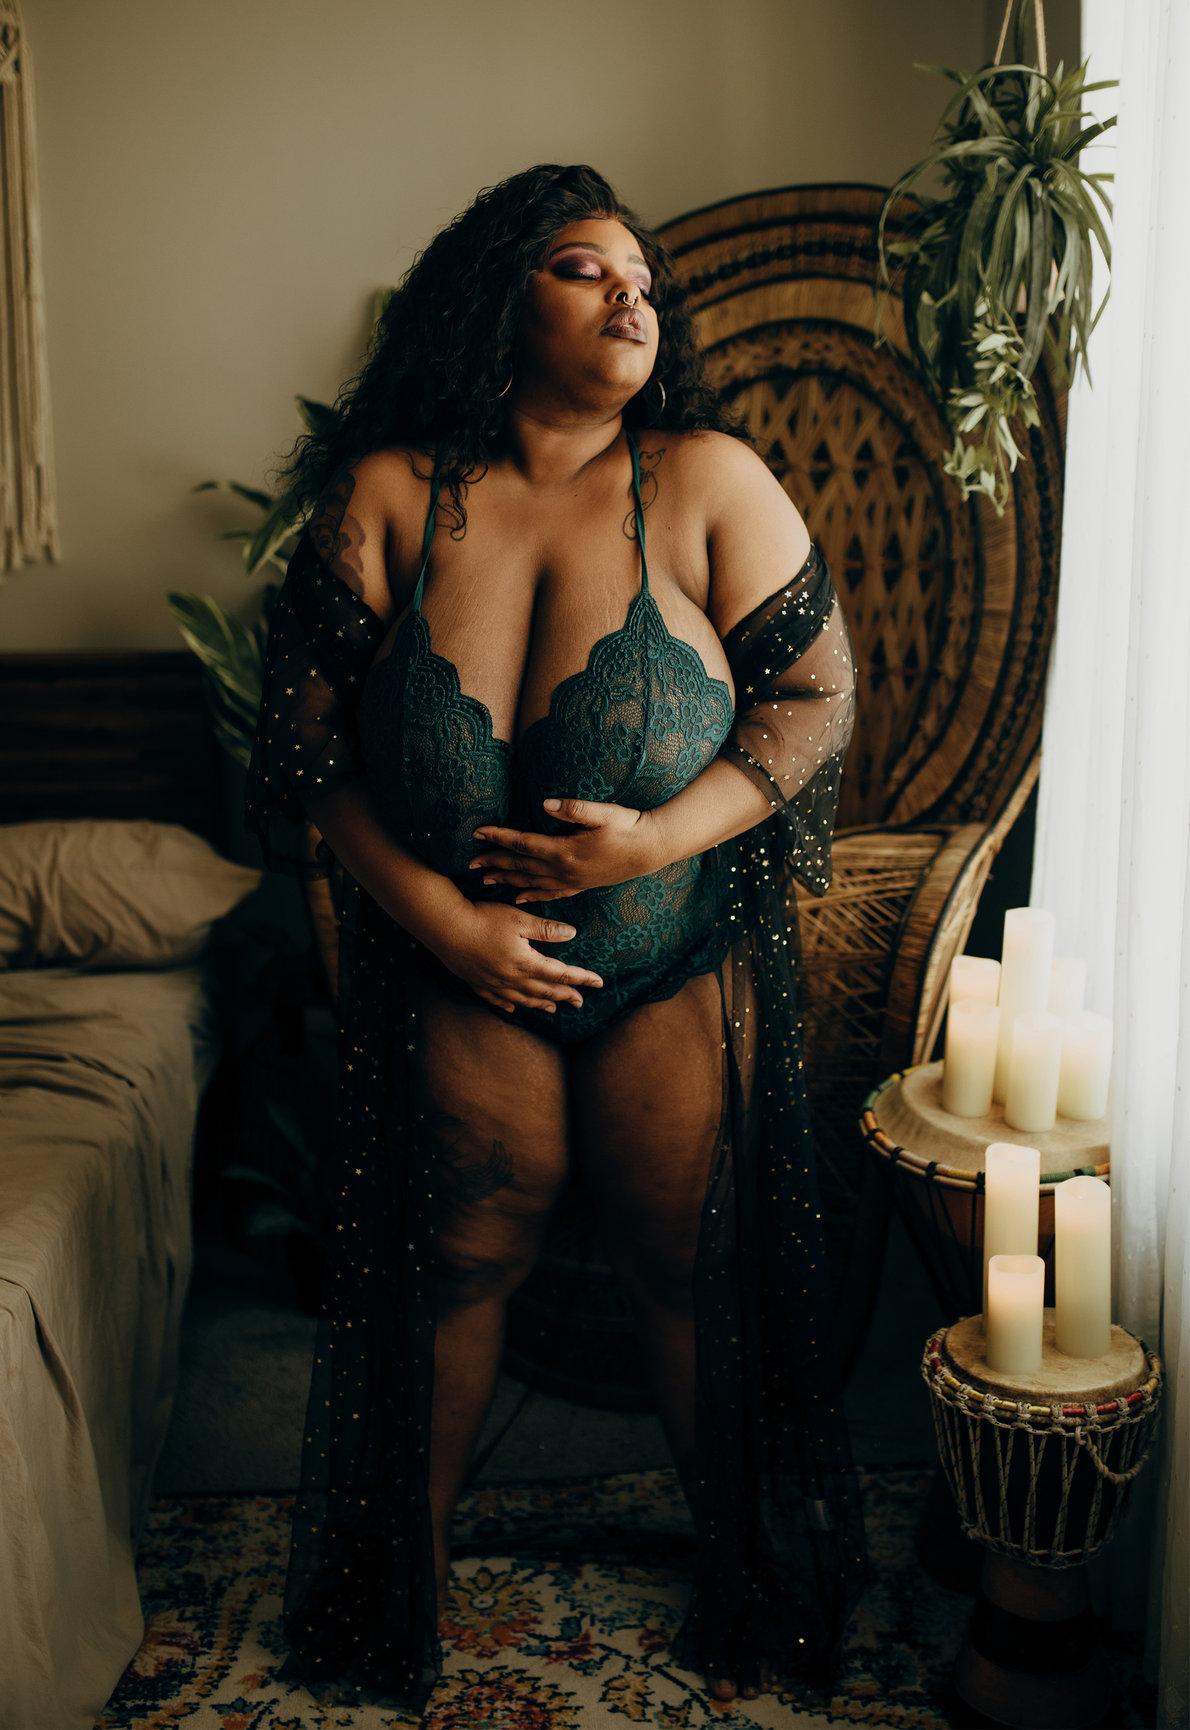 10 Reasons for All Women to Experience a Boudoir Session